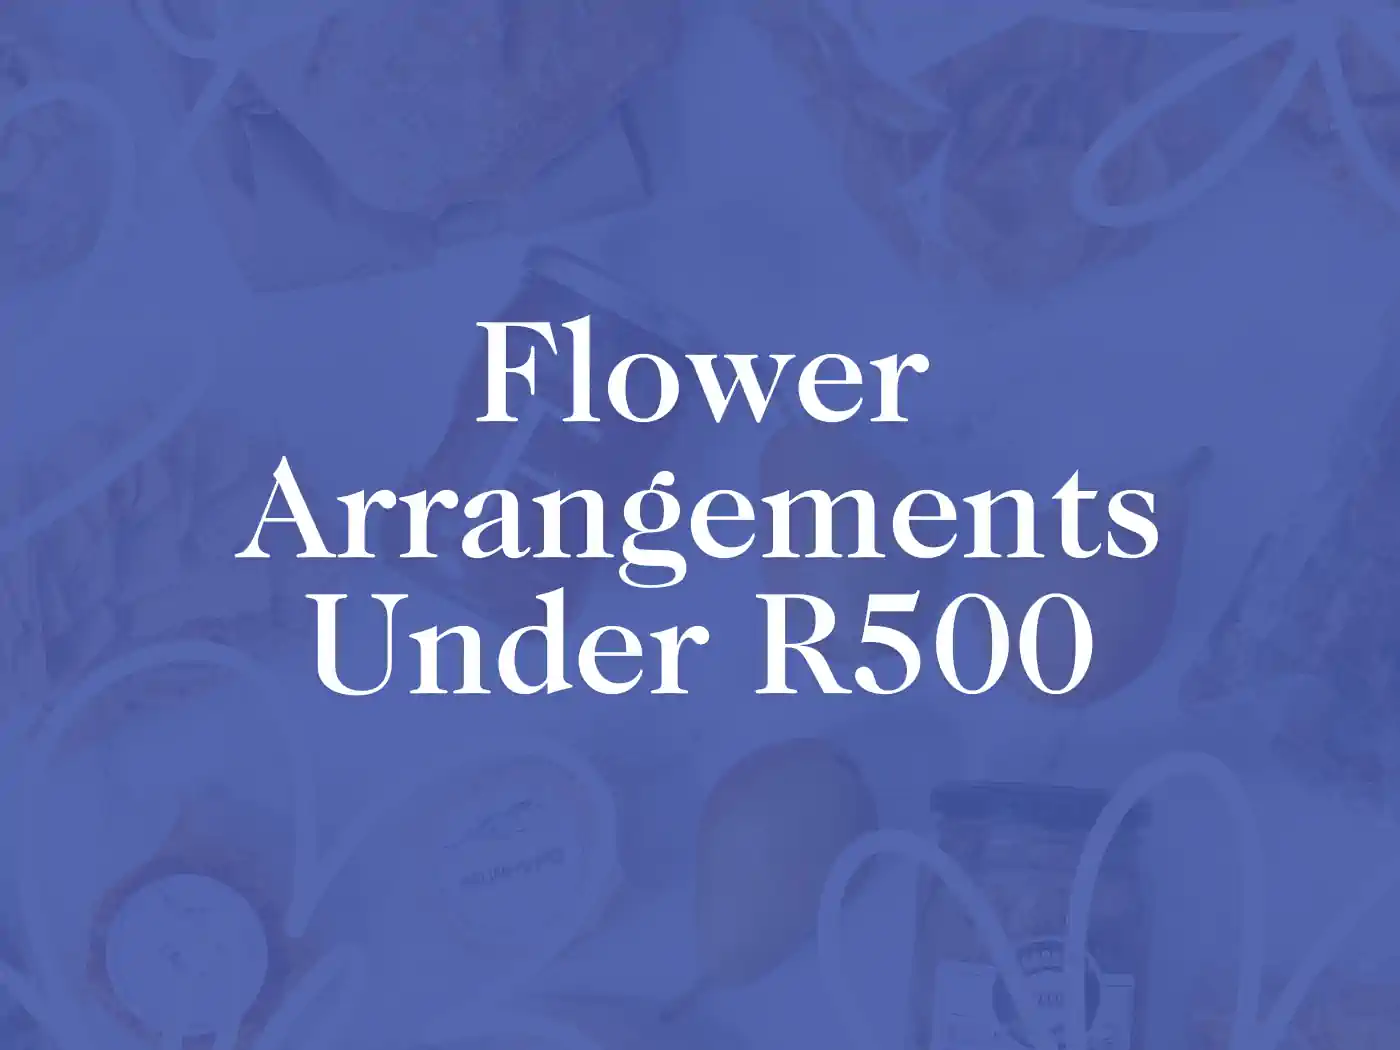 Promotional graphic in shades of blue featuring the text 'Flower Arrangements Under R500', set against a background of abstract floral and ribbon designs. Fabulous Flowers and Gifts: Delivered with Heart.